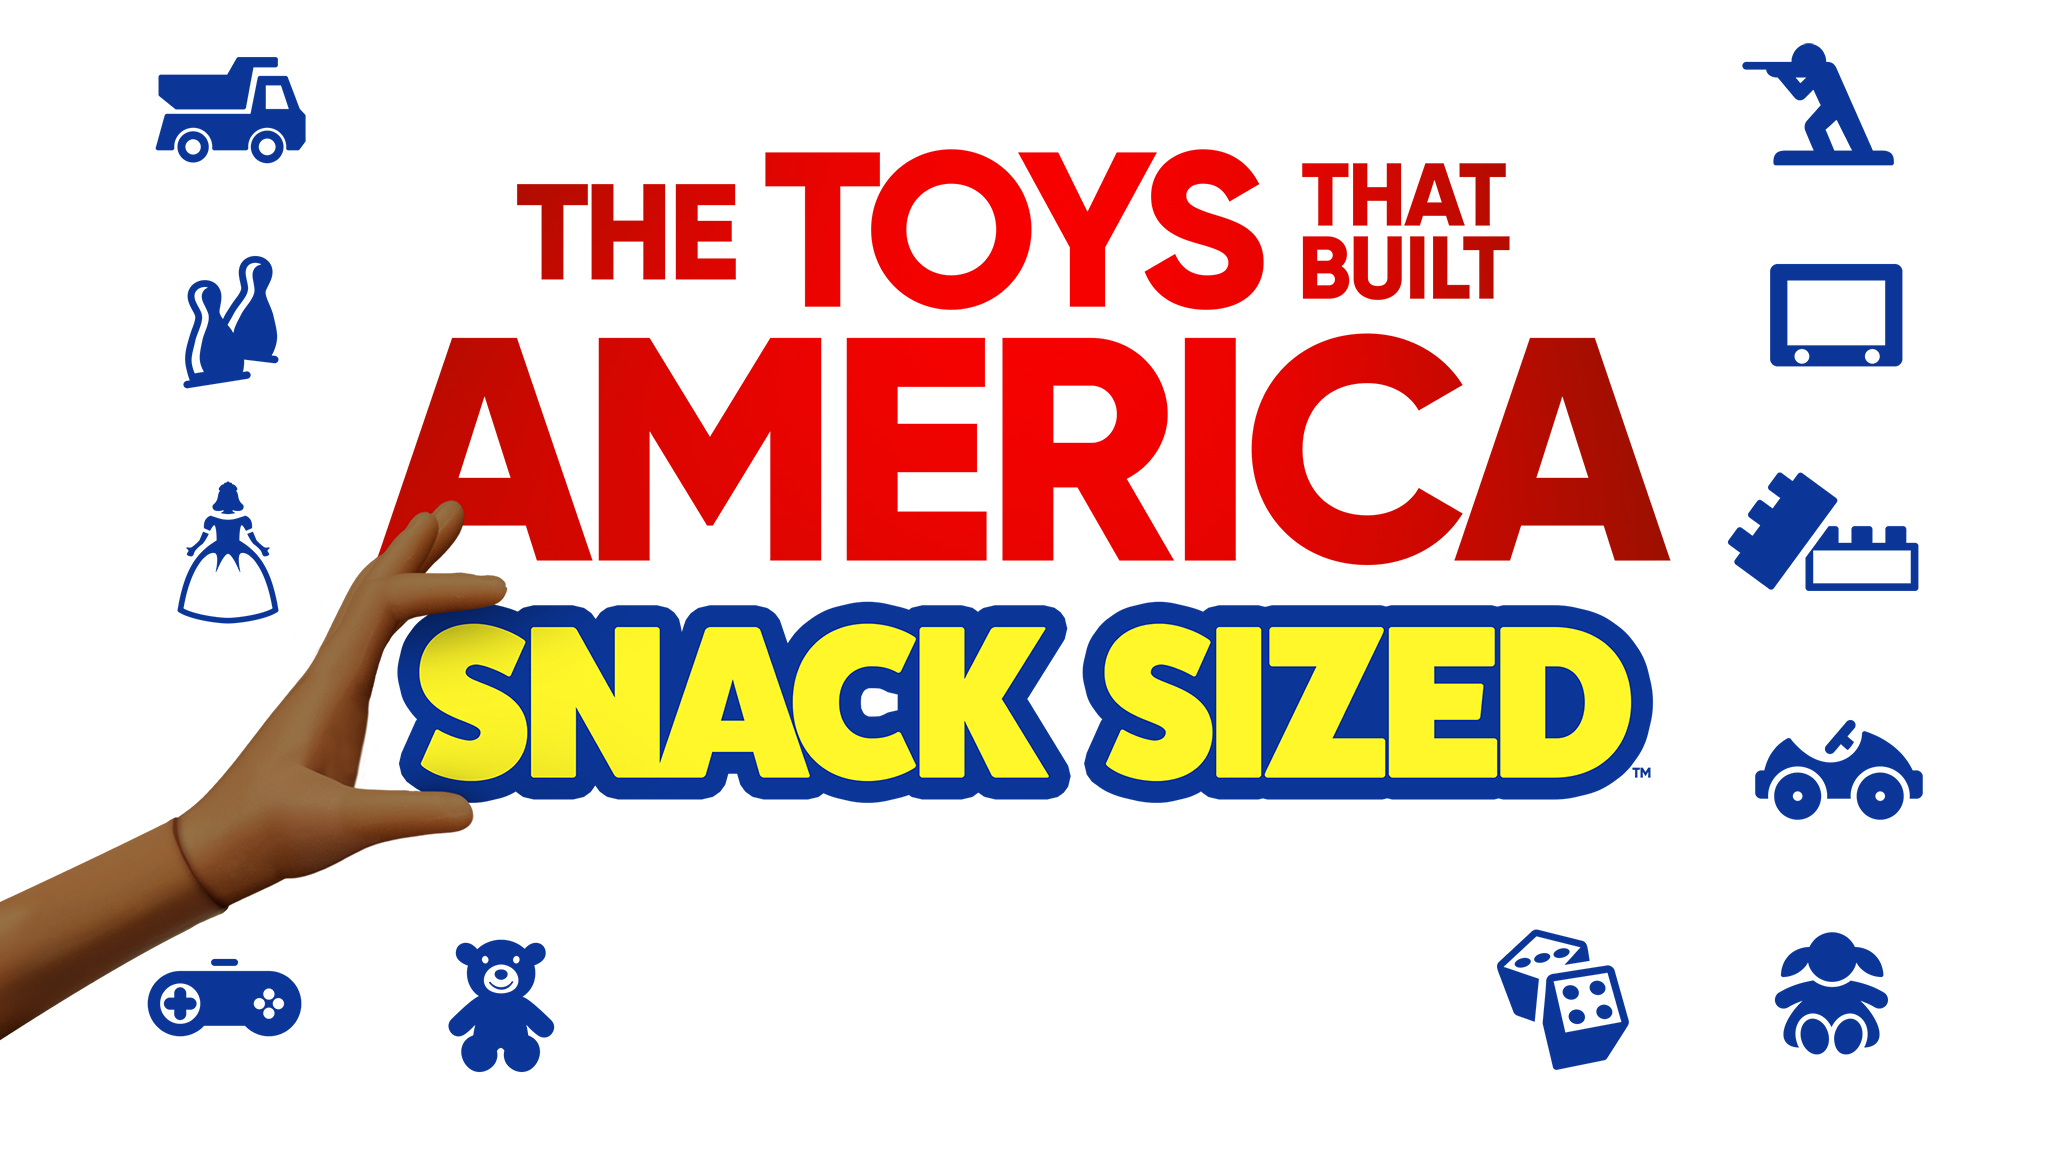 The Toys That Built America: Snack Sized